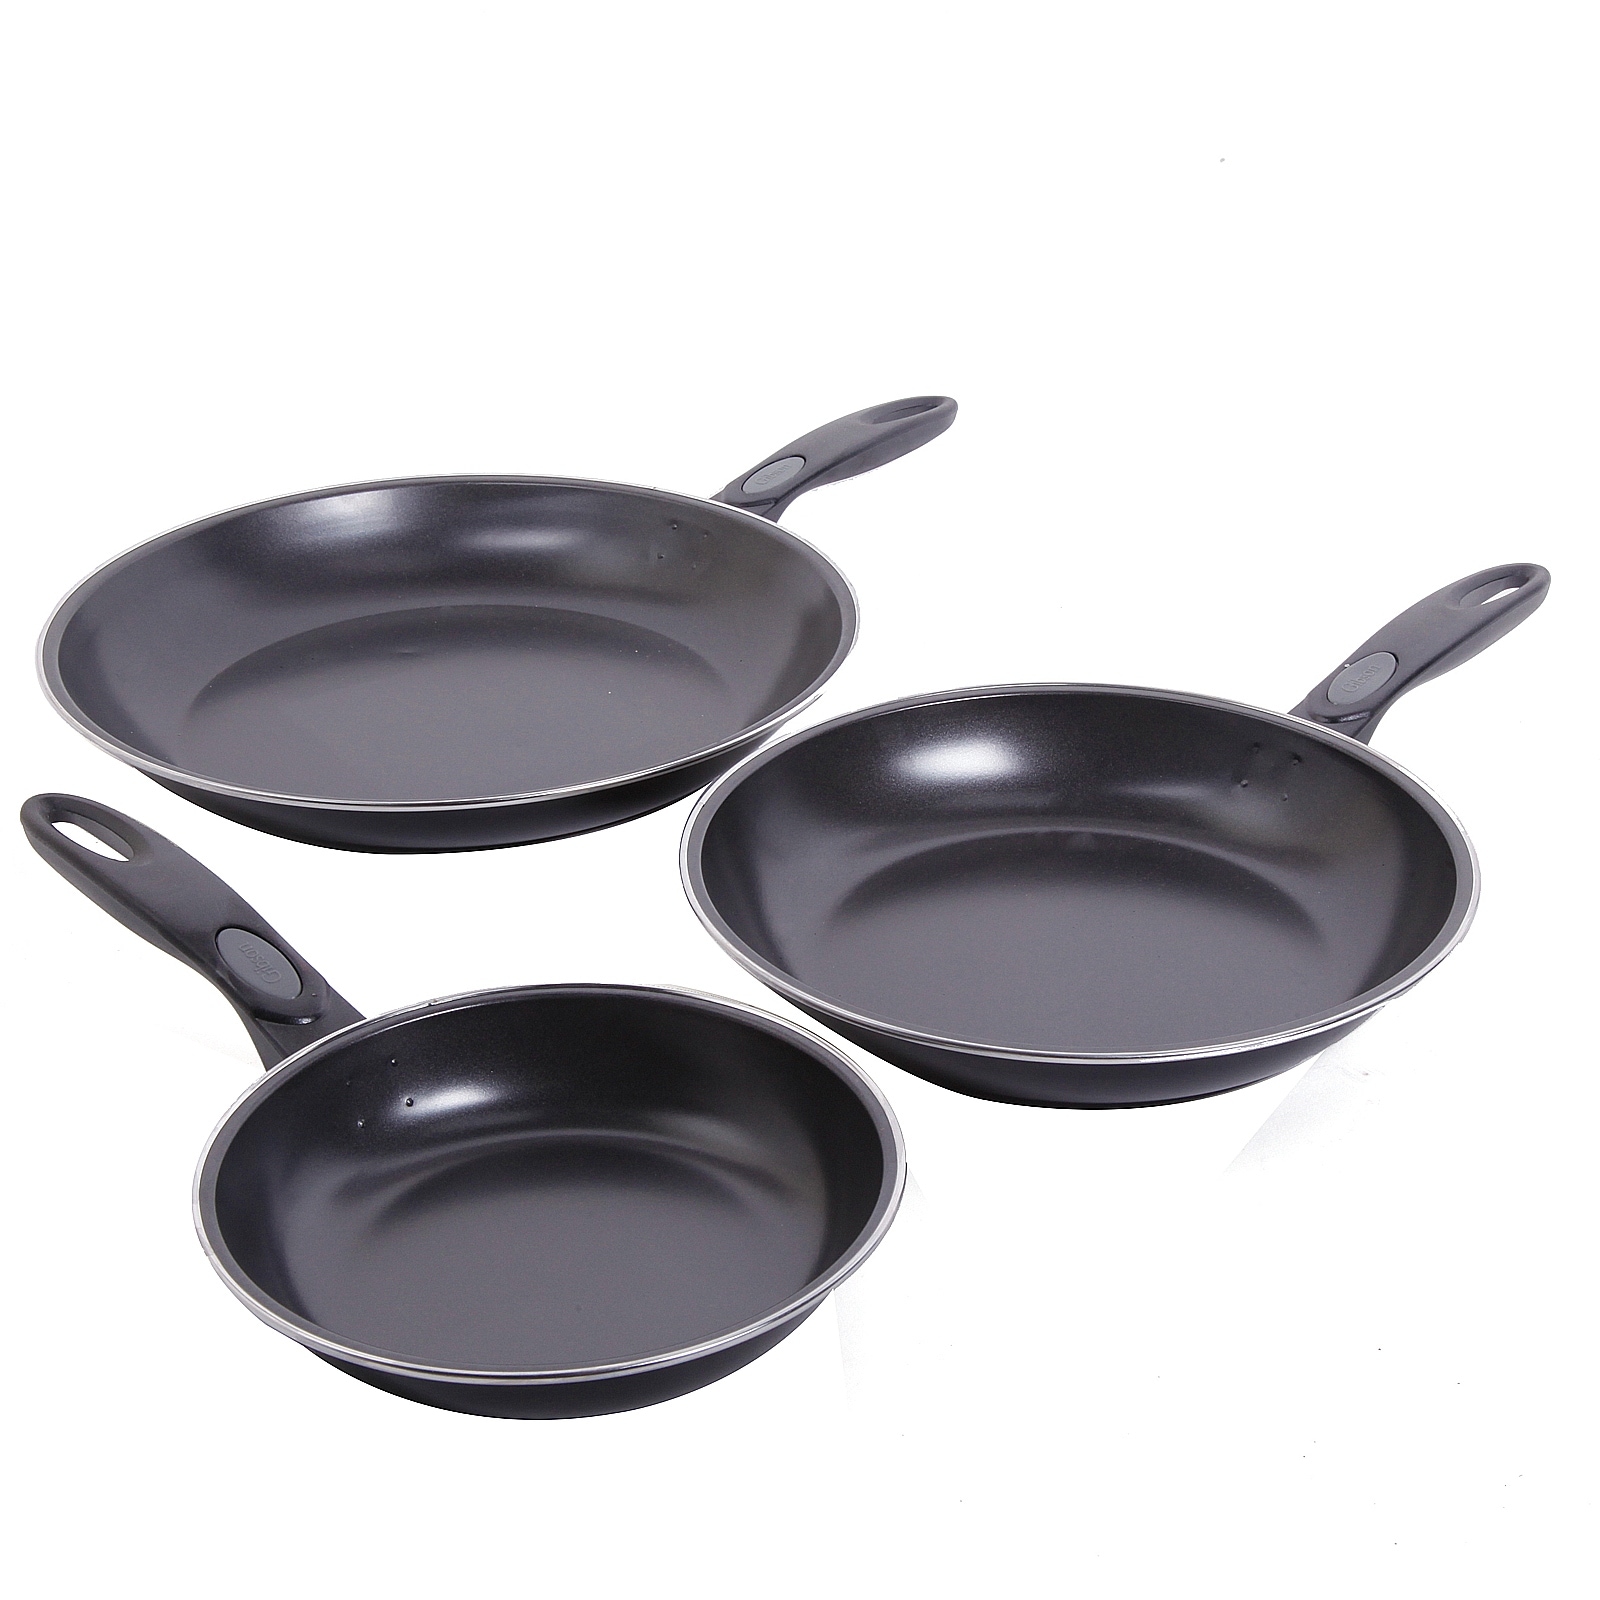 Tramontina 5-Qt. All-in-One Plus Pan in Charcoal